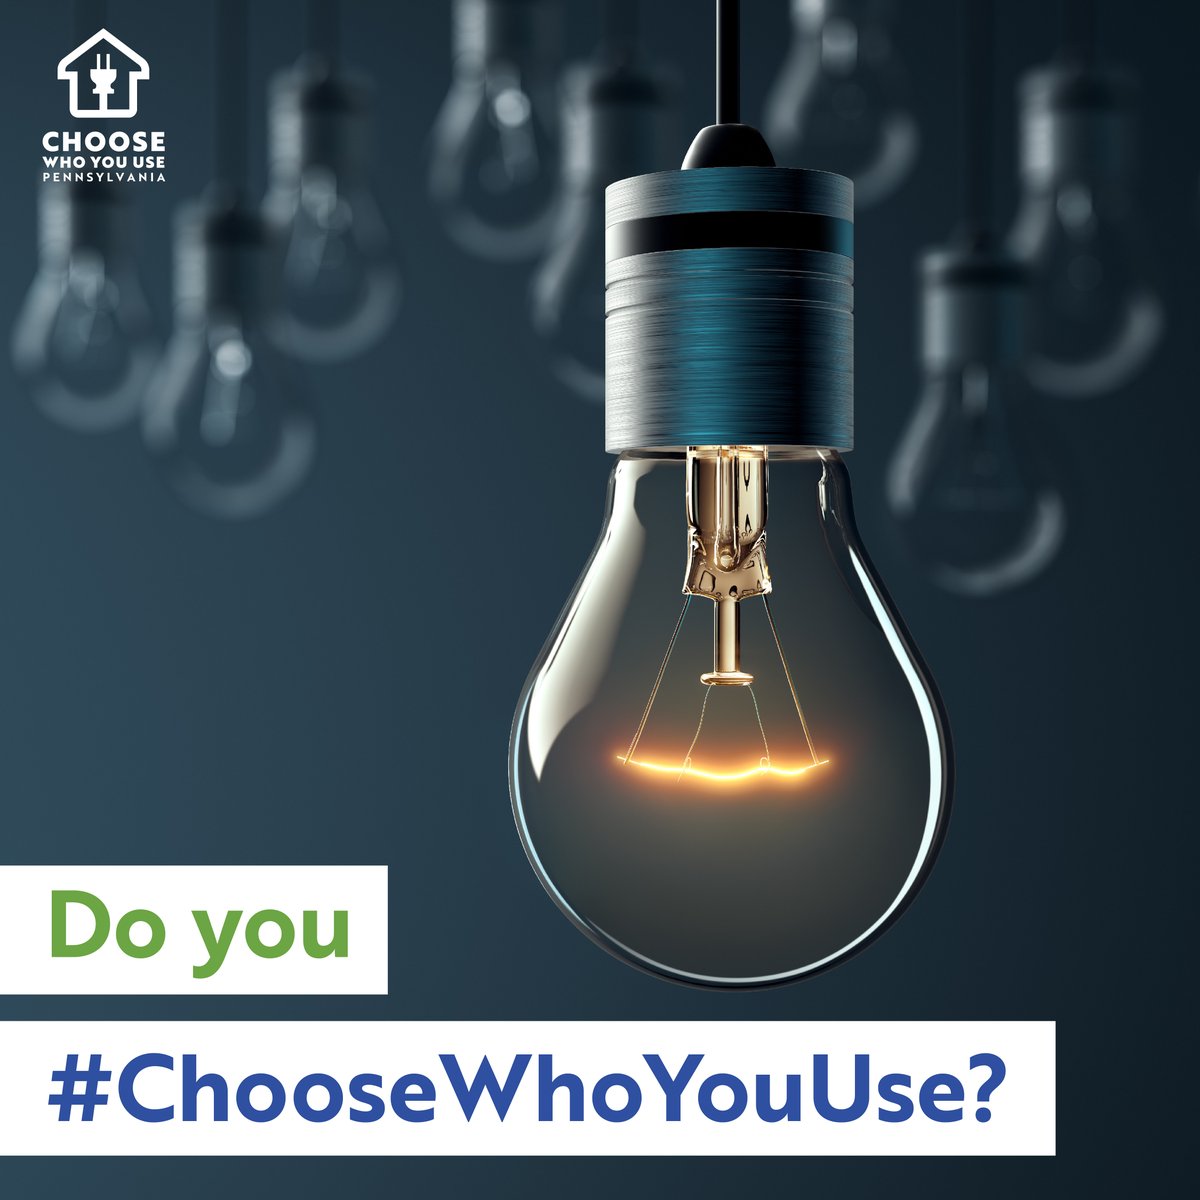 Are you among the millions of Pennsylvania residents who don't #ChooseWhoYouUse yet? It's time to join the movement so more families can access transparent and reliable options on the market. #EnergyChoice #ElectricChoice #EnergySupplier